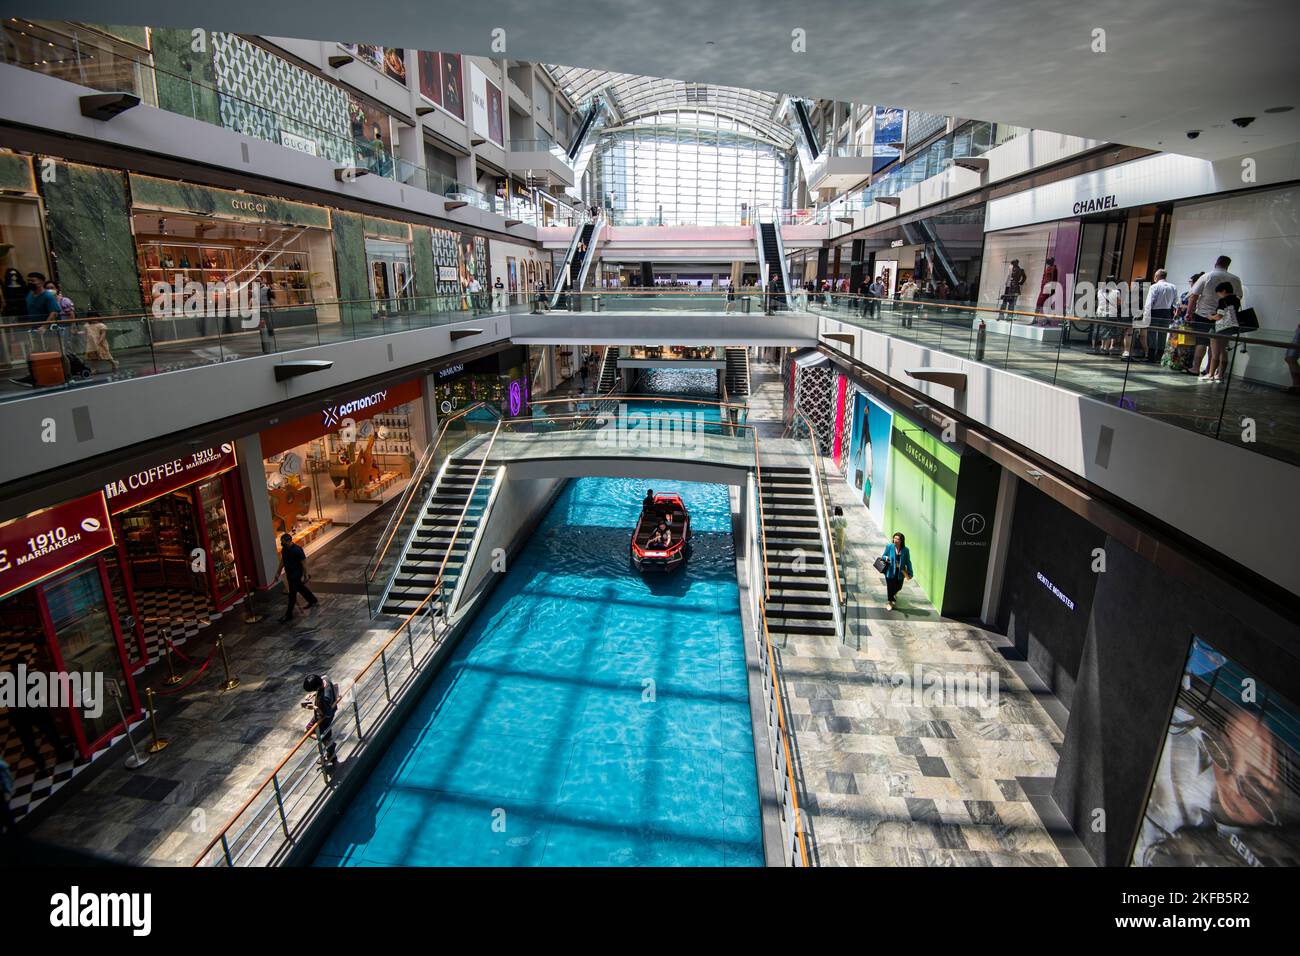 Marina Bay Sands Luxury Shopping Centre, Singapore - high quality architectural design in steel and glass. Stock Photo